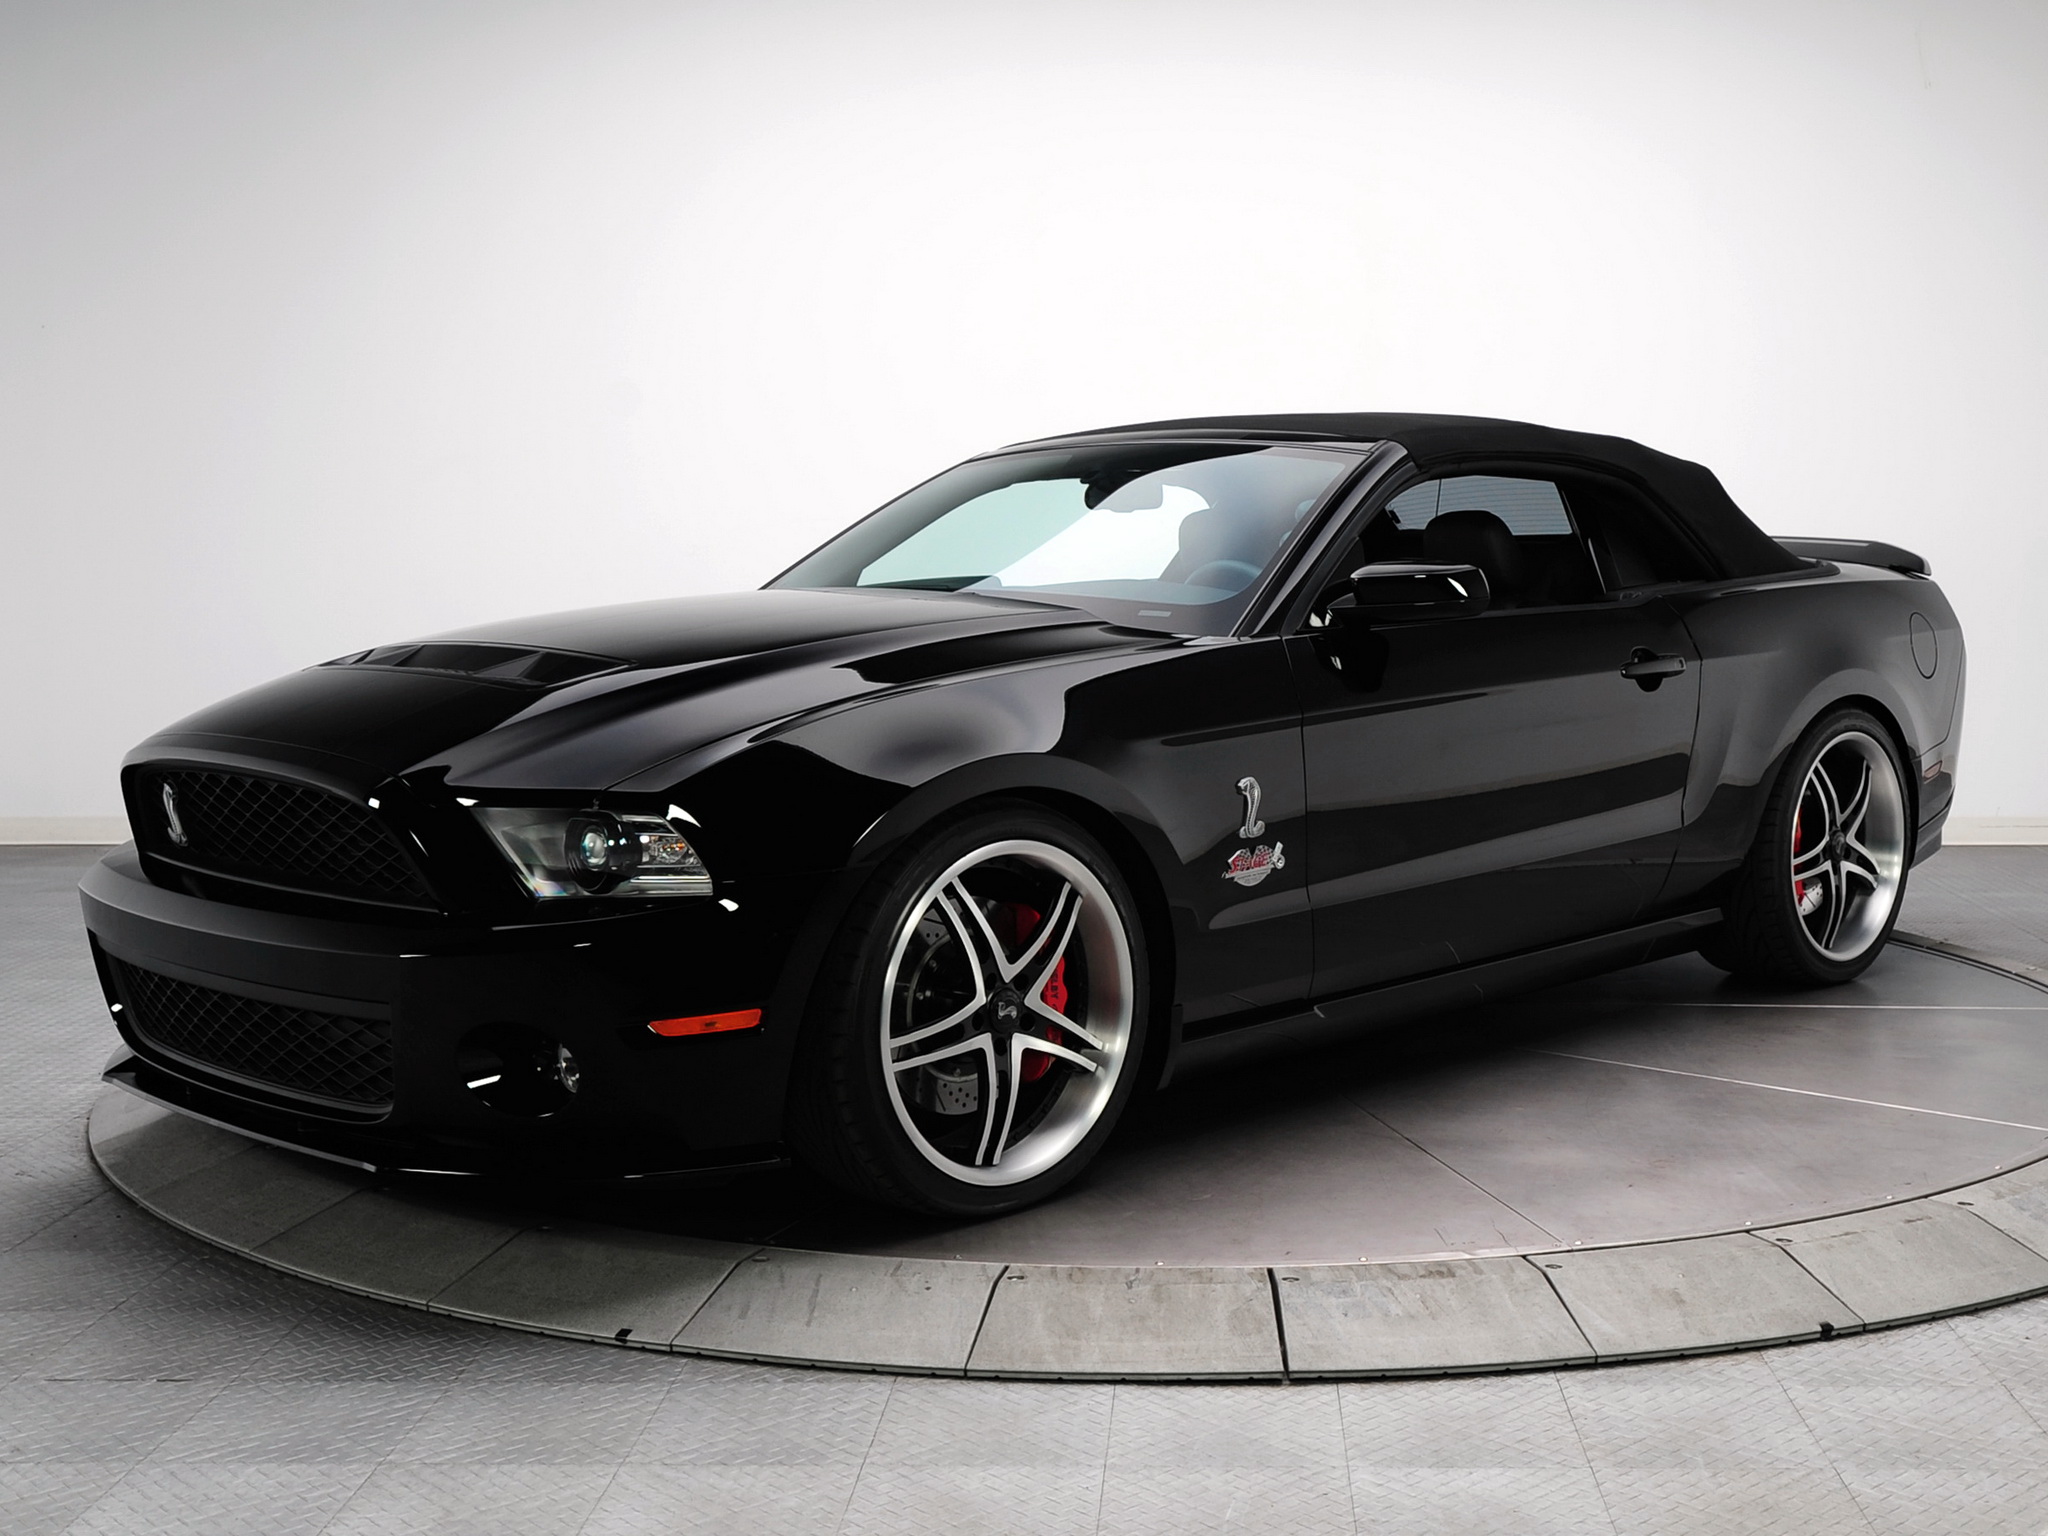 2010, Shelby, Gt500, Evolution performance, Stage 6, Ford, Mustang, Muscle, Tuning Wallpaper